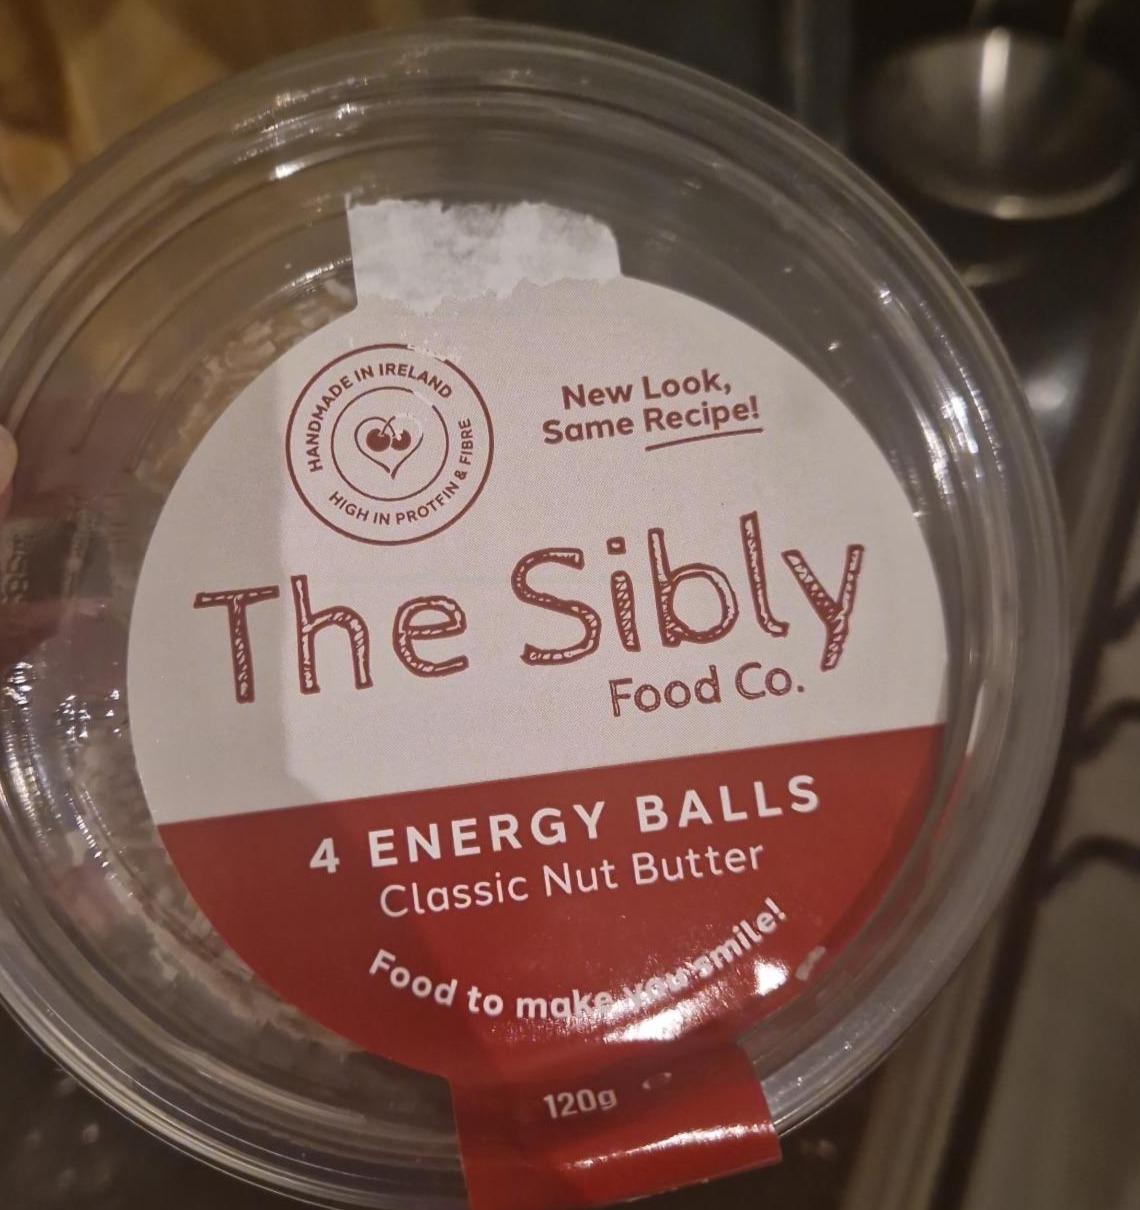 Fotografie - Energy Balls Classic Nut Butter The Sibly Food Co.